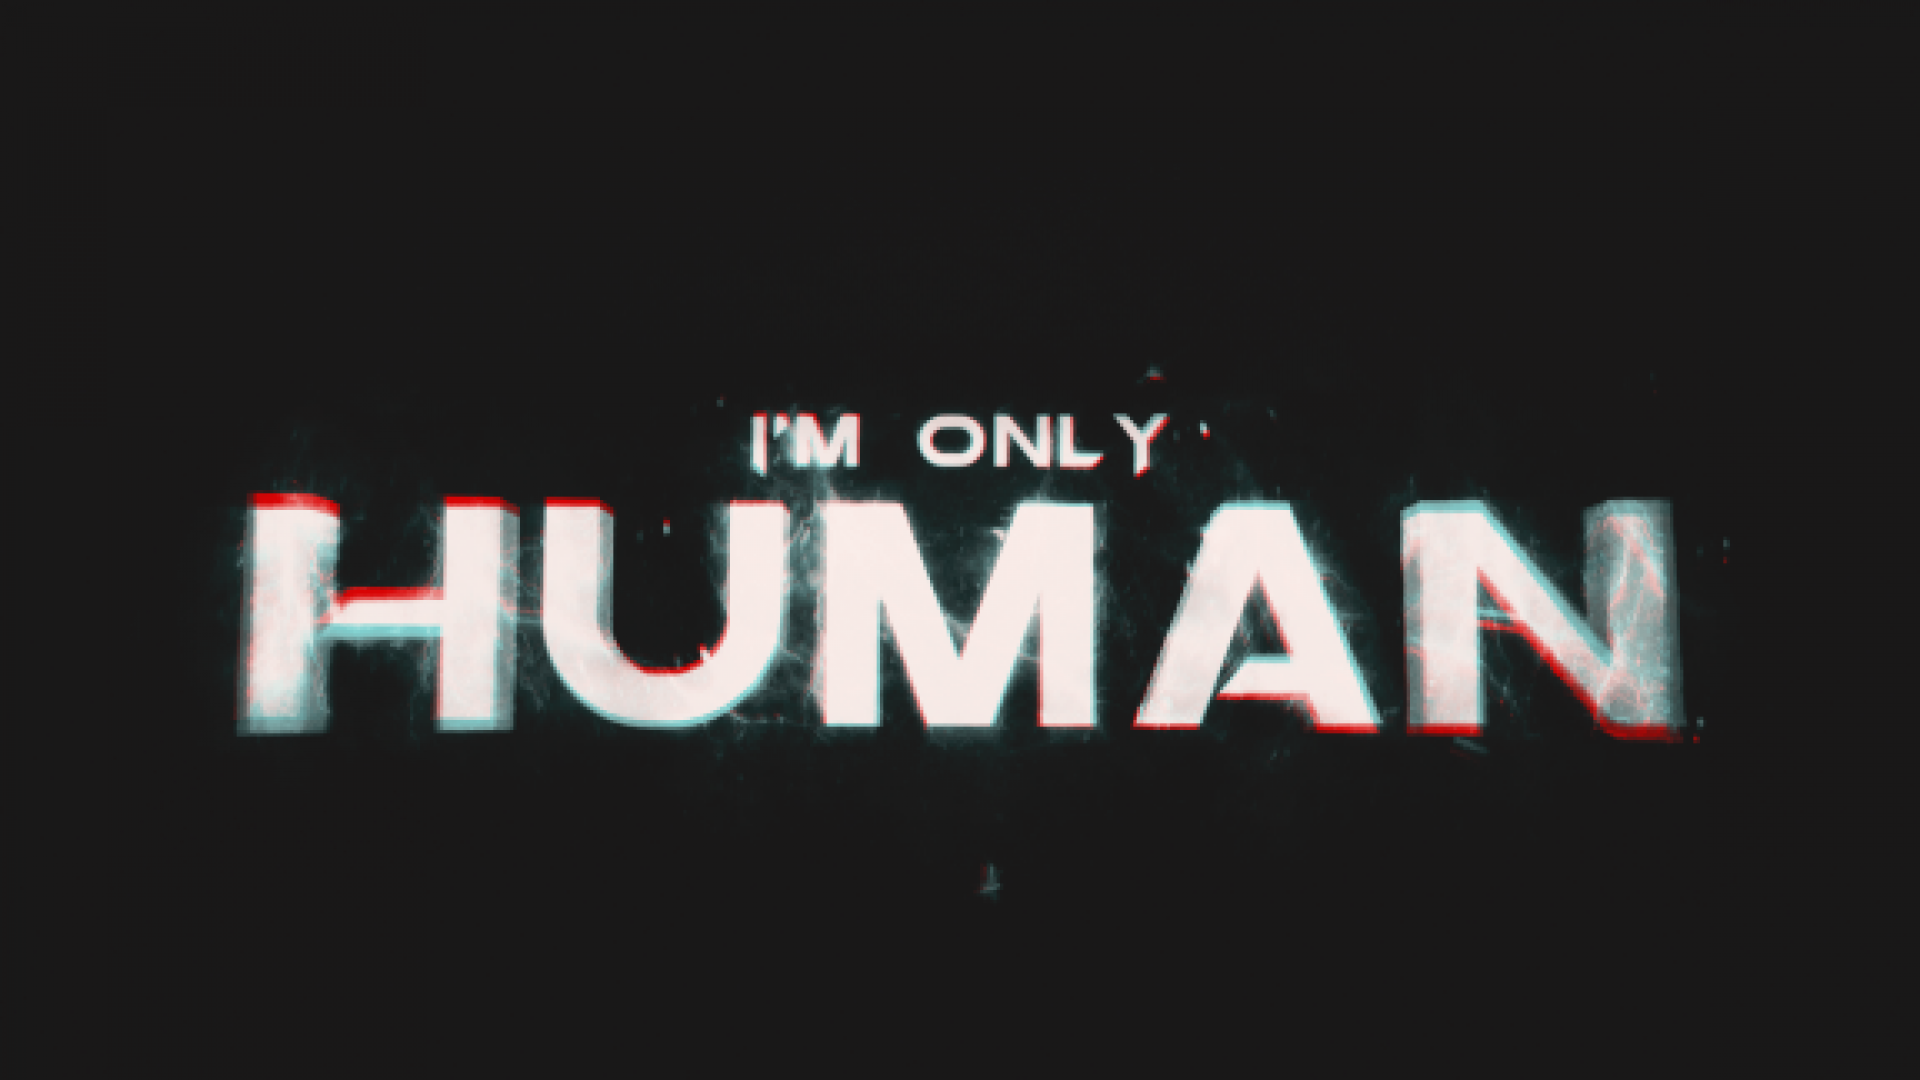 I’M ONLY HUMAN